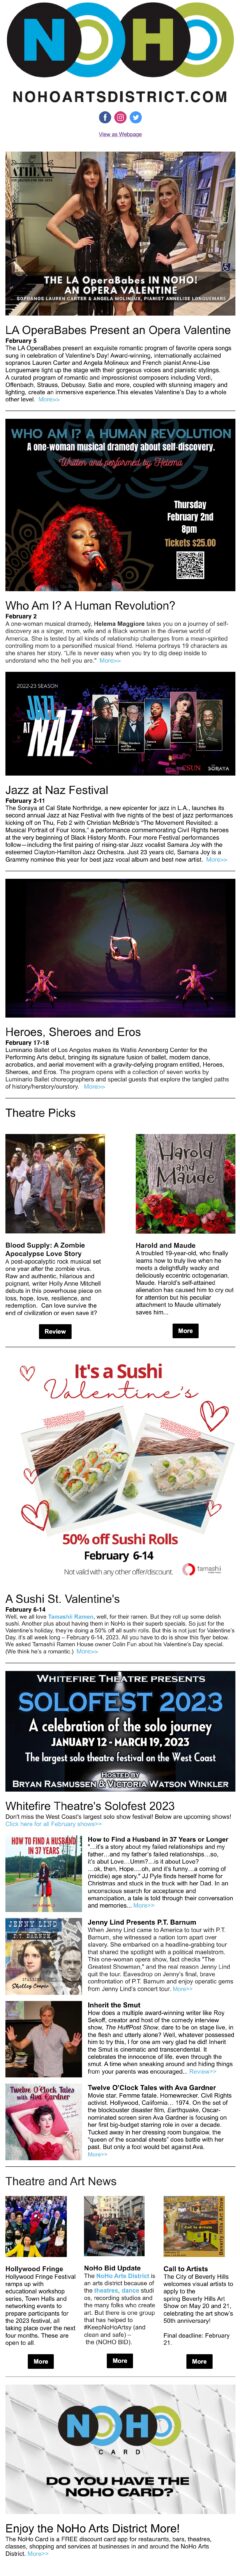 NoHo News: LA OperaBabes.  Jazz at Naz Festival.  A Sushi St.  Valentine's.  Heroes, Heroes and Eros.  Solofest 2023. Blood Supply - A Zombie Love Story.  Call to Artists.  #KeepNoHoArtsy